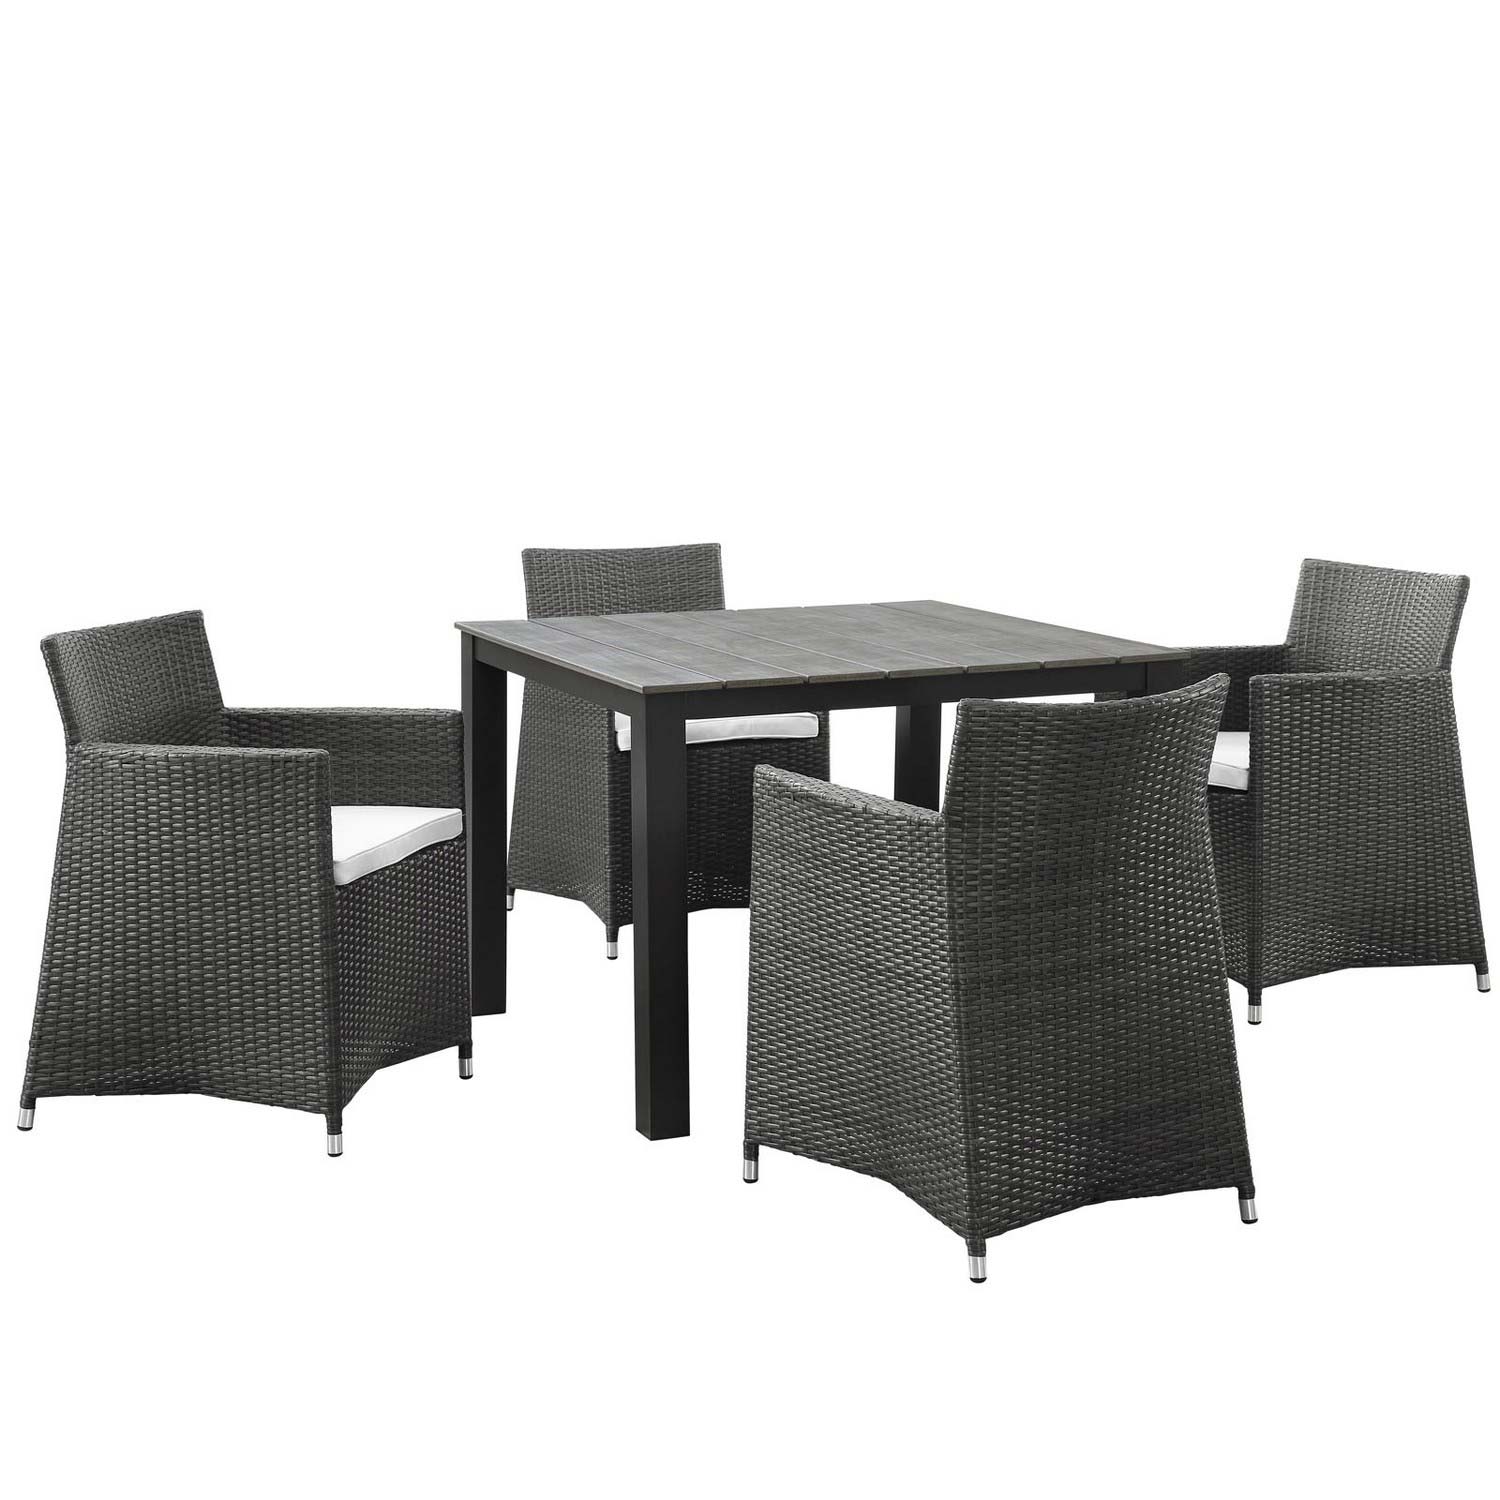 Modway Junction 5 Piece Outdoor Patio Dining Set - Brown/White